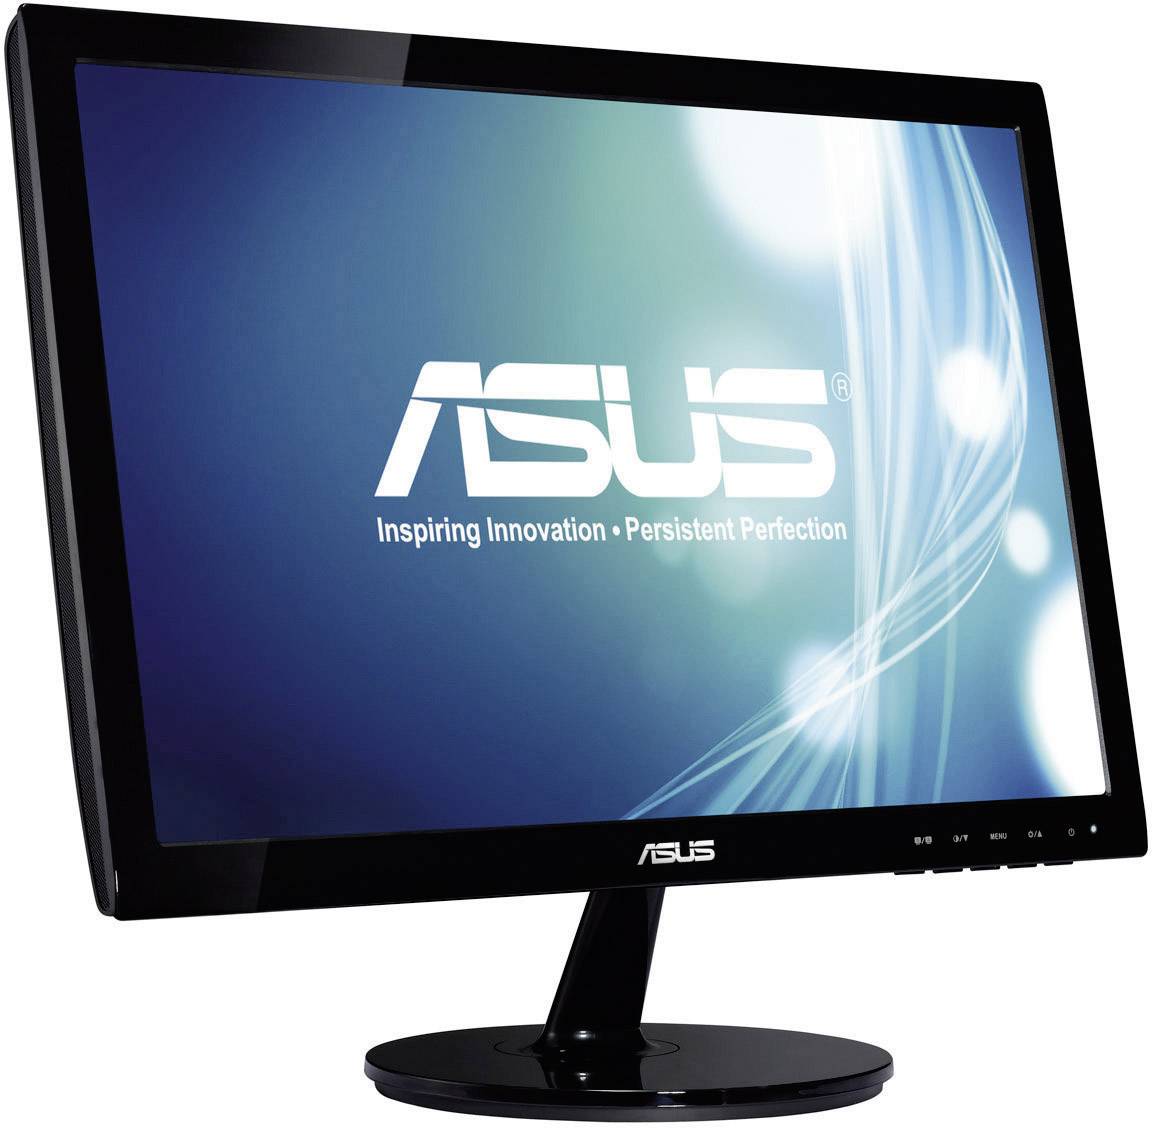 Asus computer gmbh monitor 640x480 video mode download for windows 8